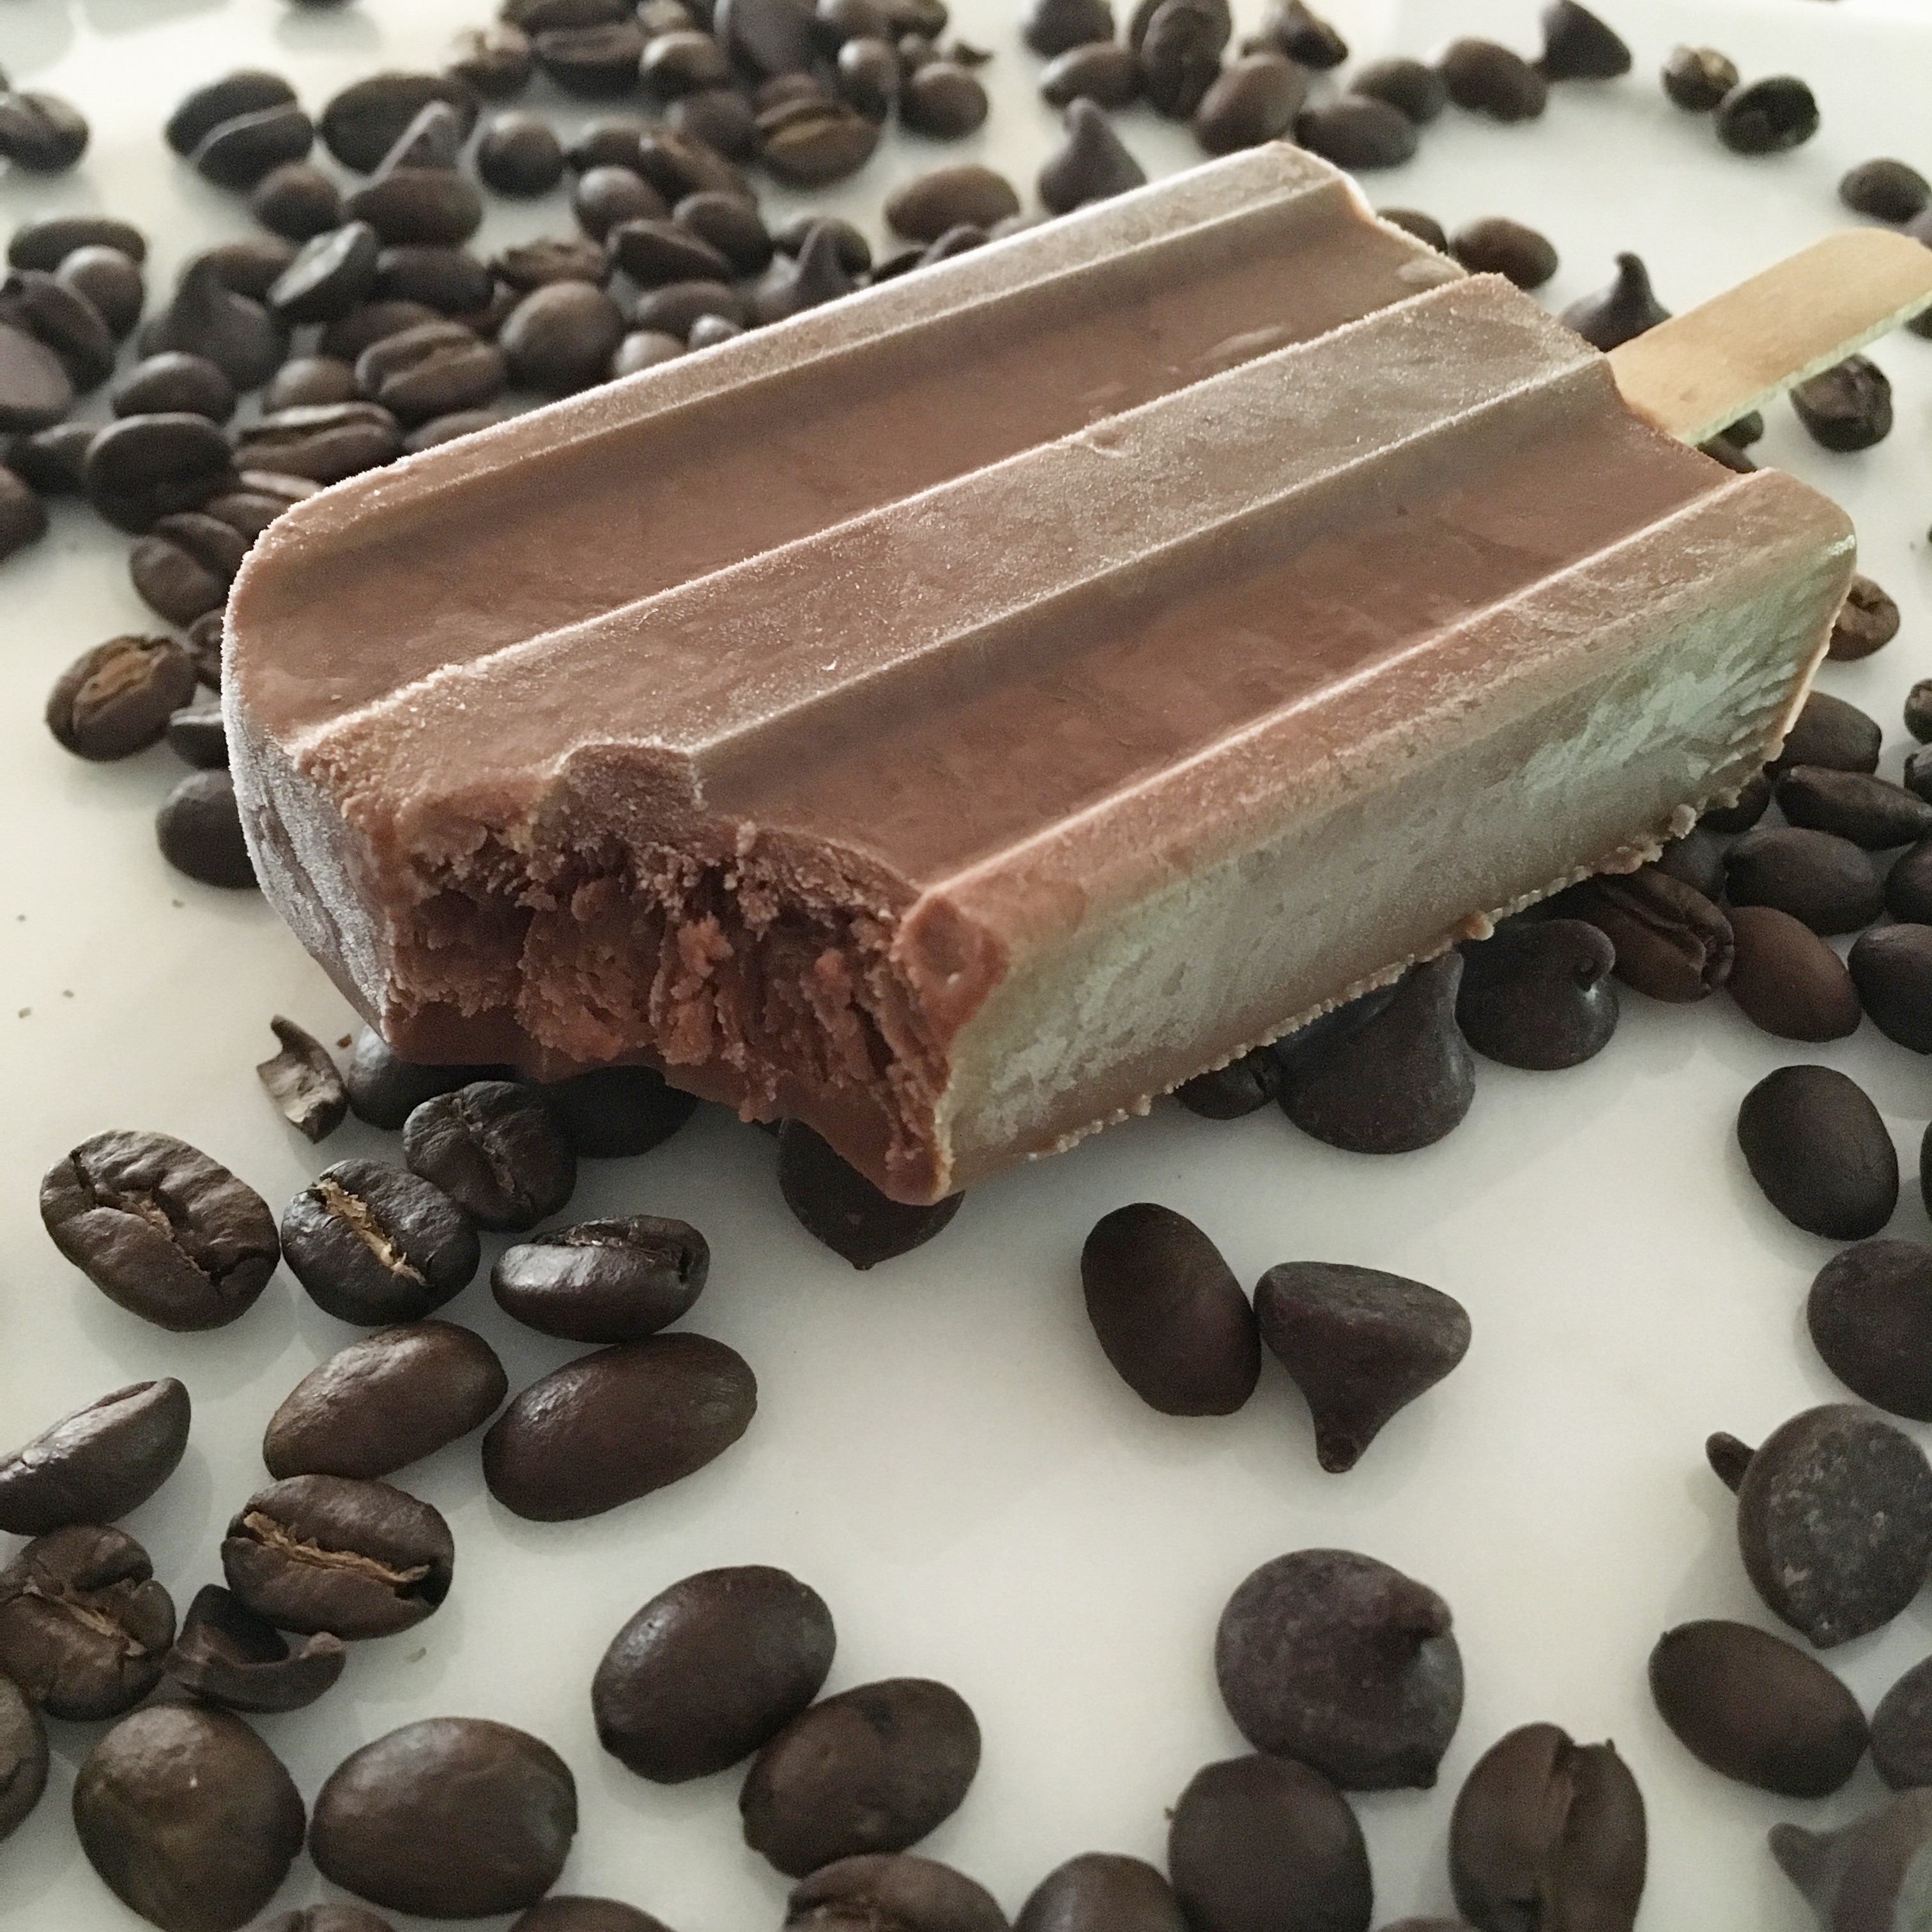 New England Coffee 100 year celebration From the Family With Love Mocha Fudge Pop Fudgsicle